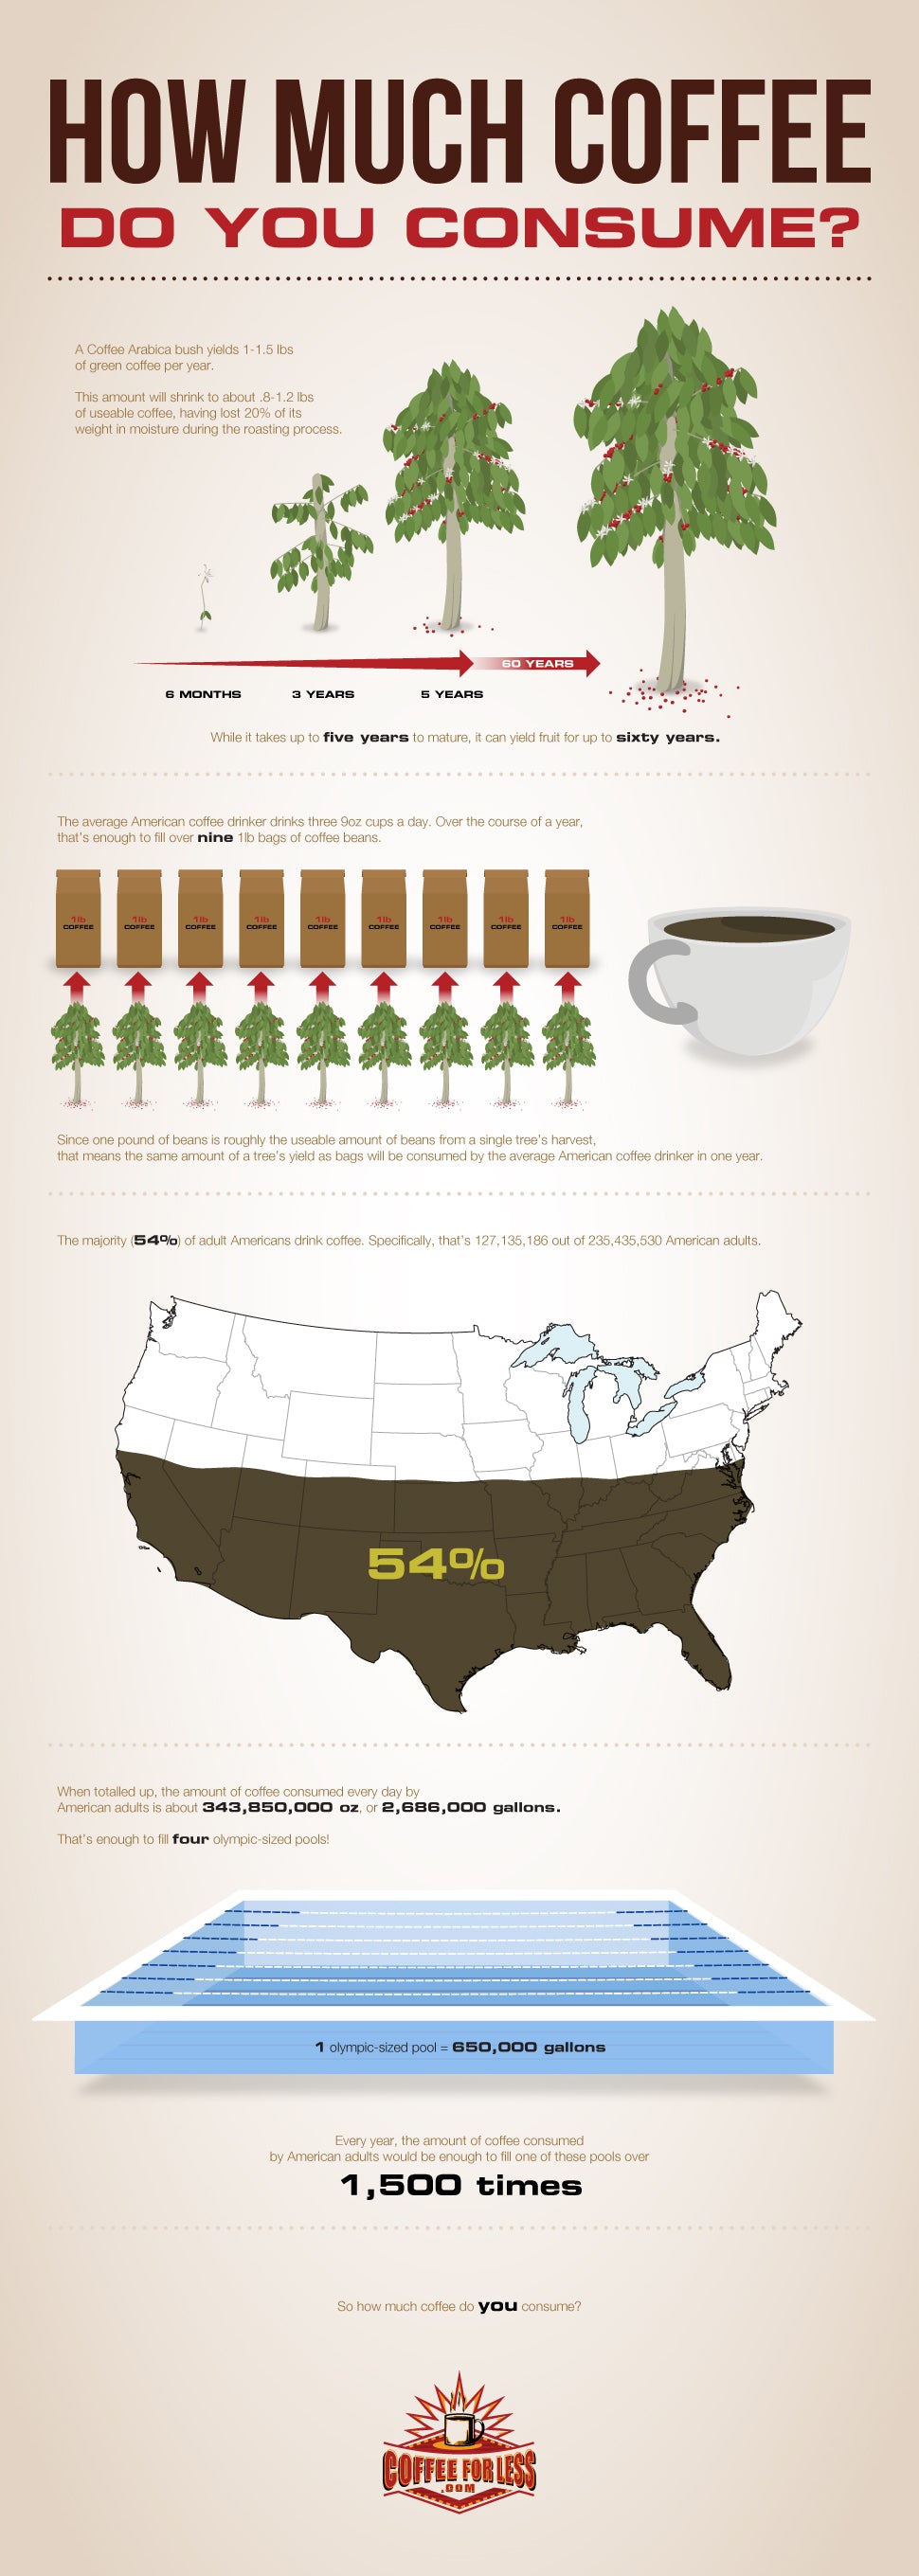 See how much coffee the average American consumes on a daily and annual basis.